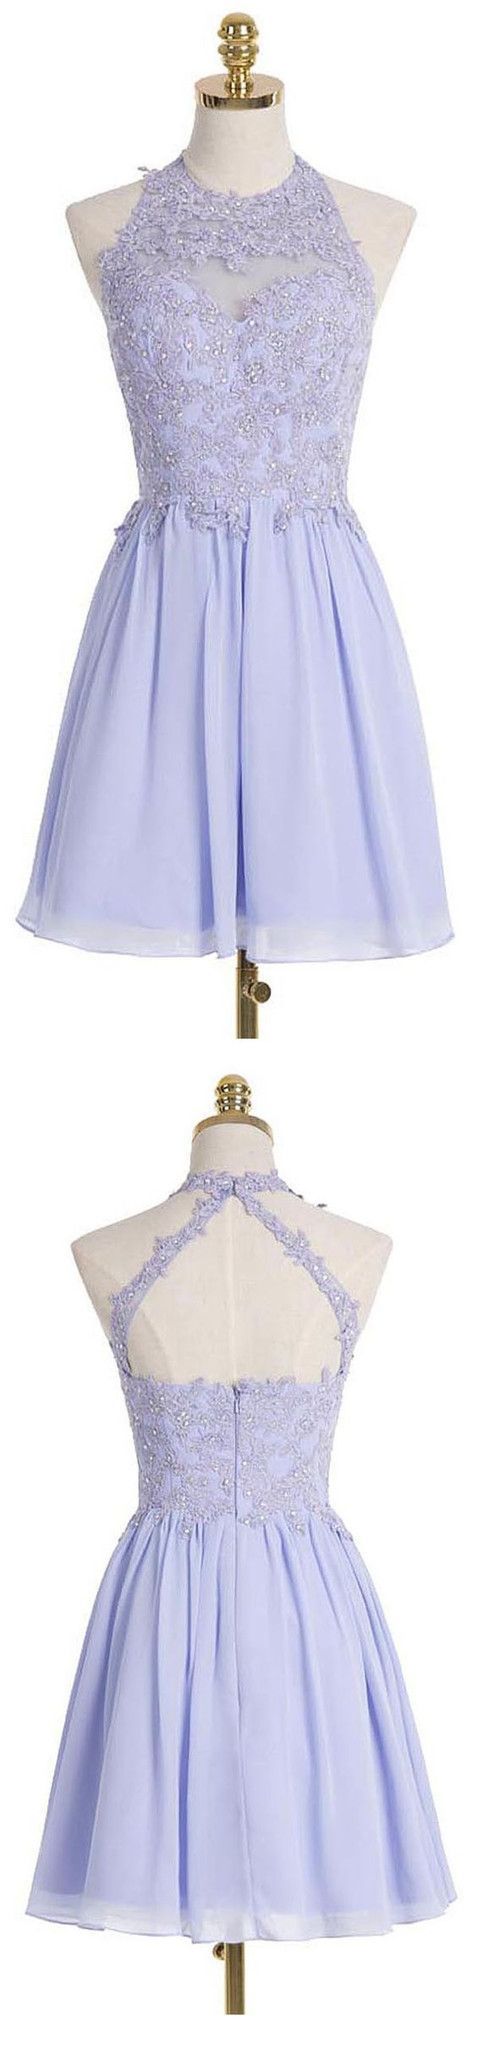 Sexy Halter Neck Lavender Chiffon Short Homecoming Dress Beaded Party Gowns For Teens,sexy Pageant Gowns